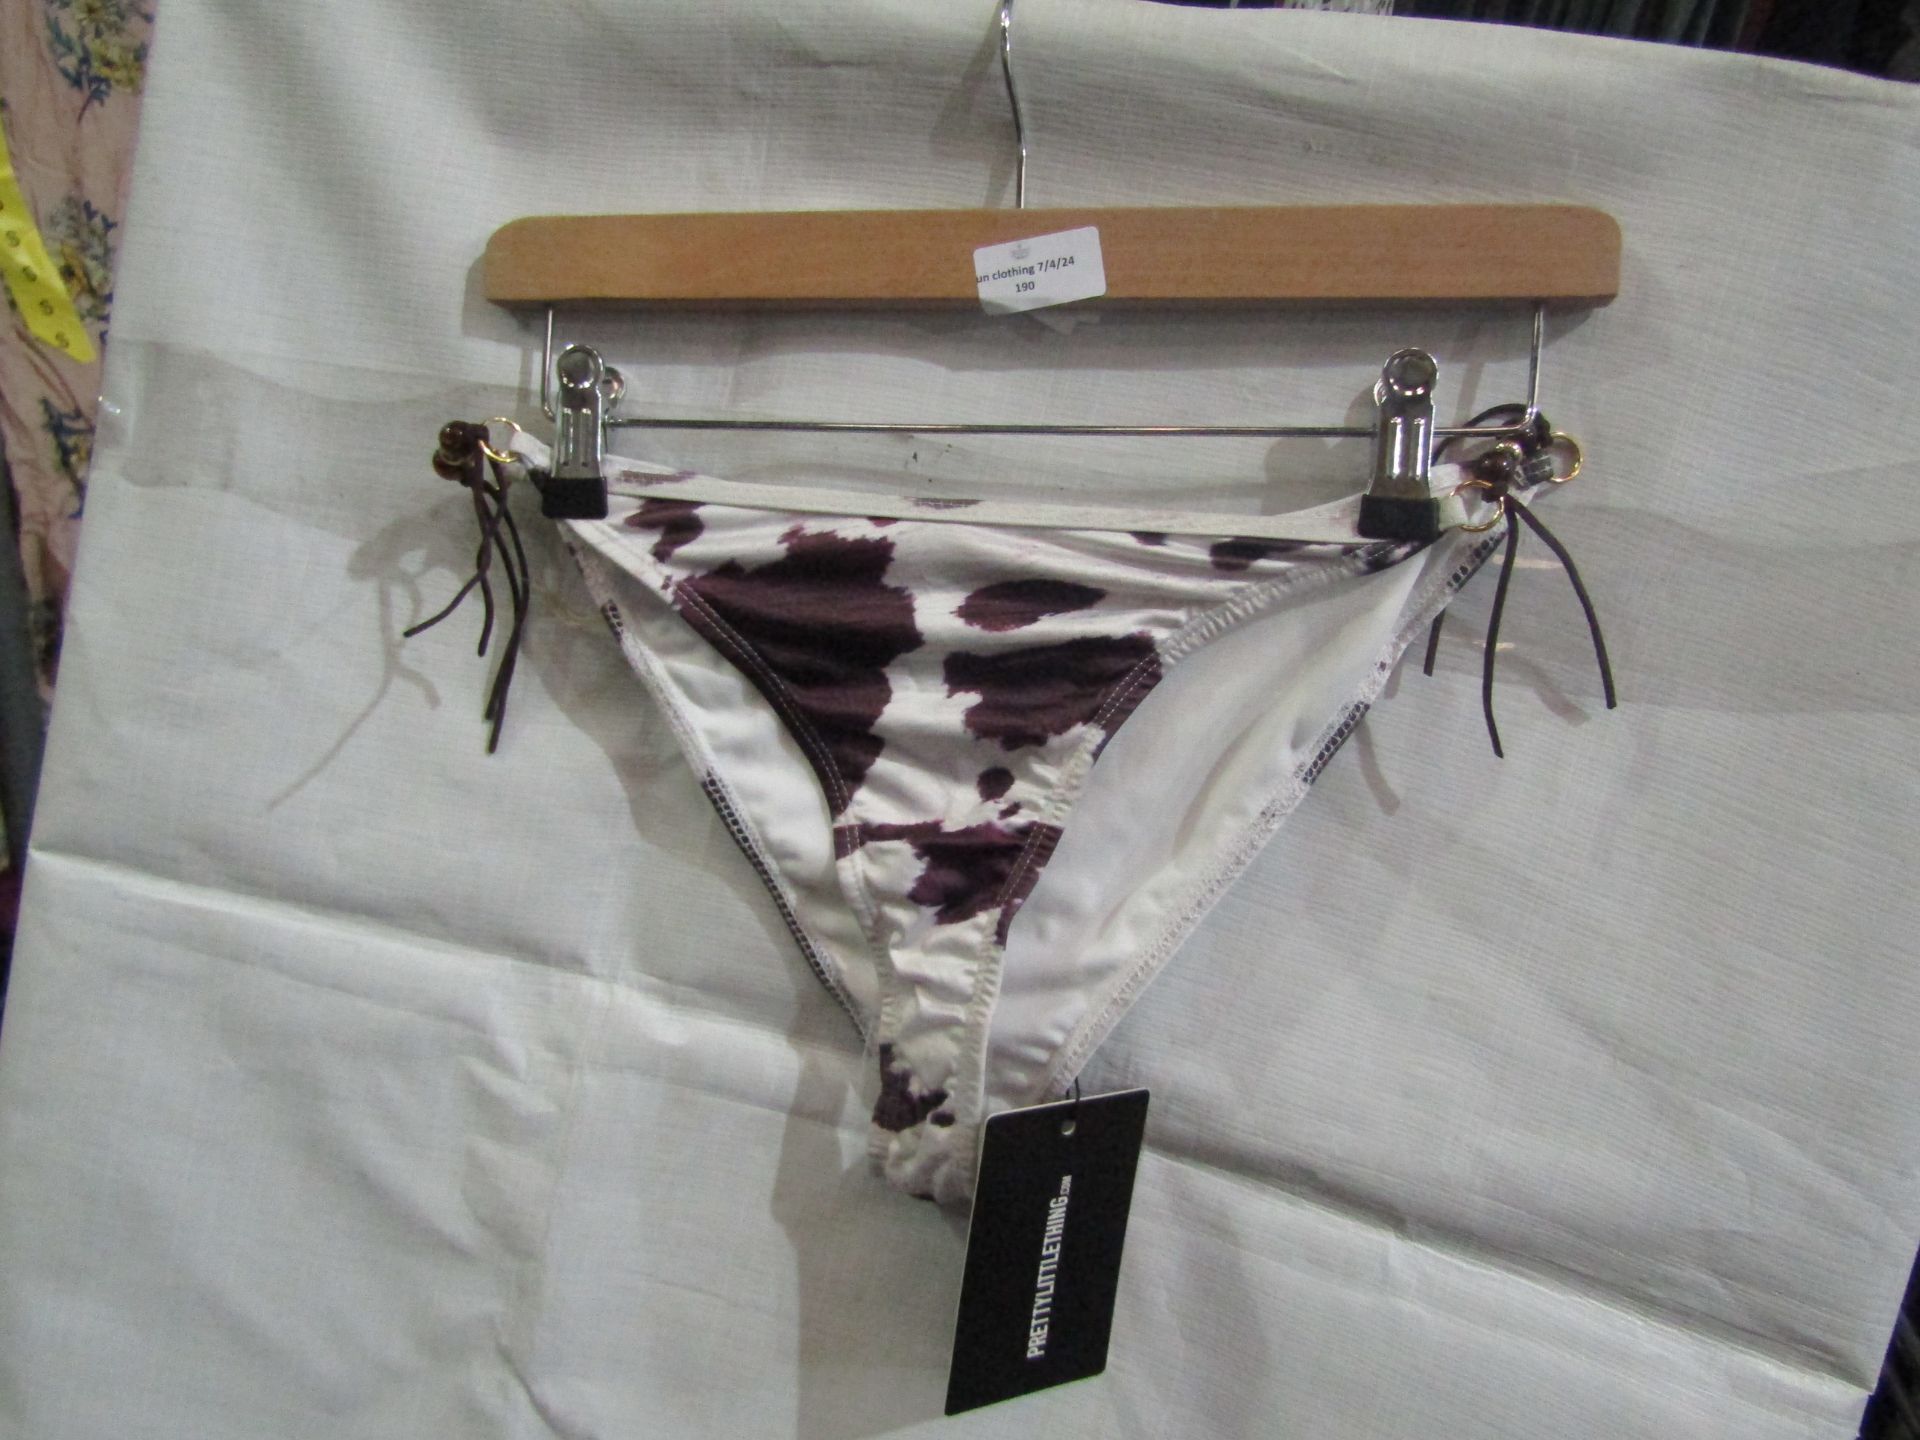 2x Pretty Little Thing Brown Cow Print Beaded Tie Bikini Bottoms - Size 6, New & Packaged.